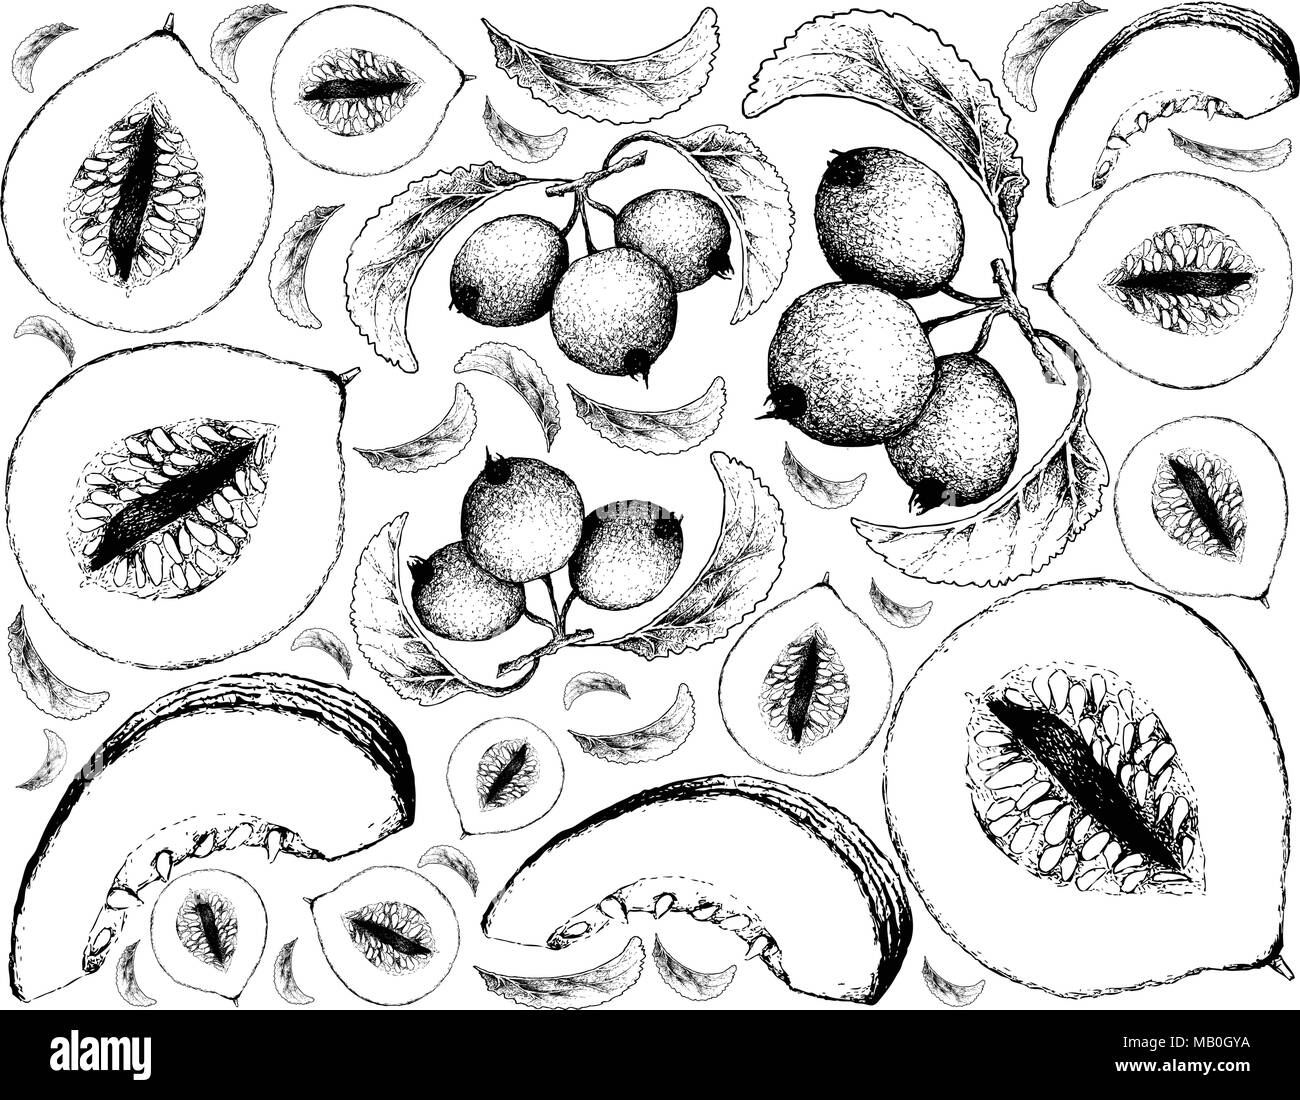 Exotic Fruit, Illustration Wallpaper Background of Hand Drawn Sketch of Casaba Melon and Crabapple or Malus Fruits. Stock Vector